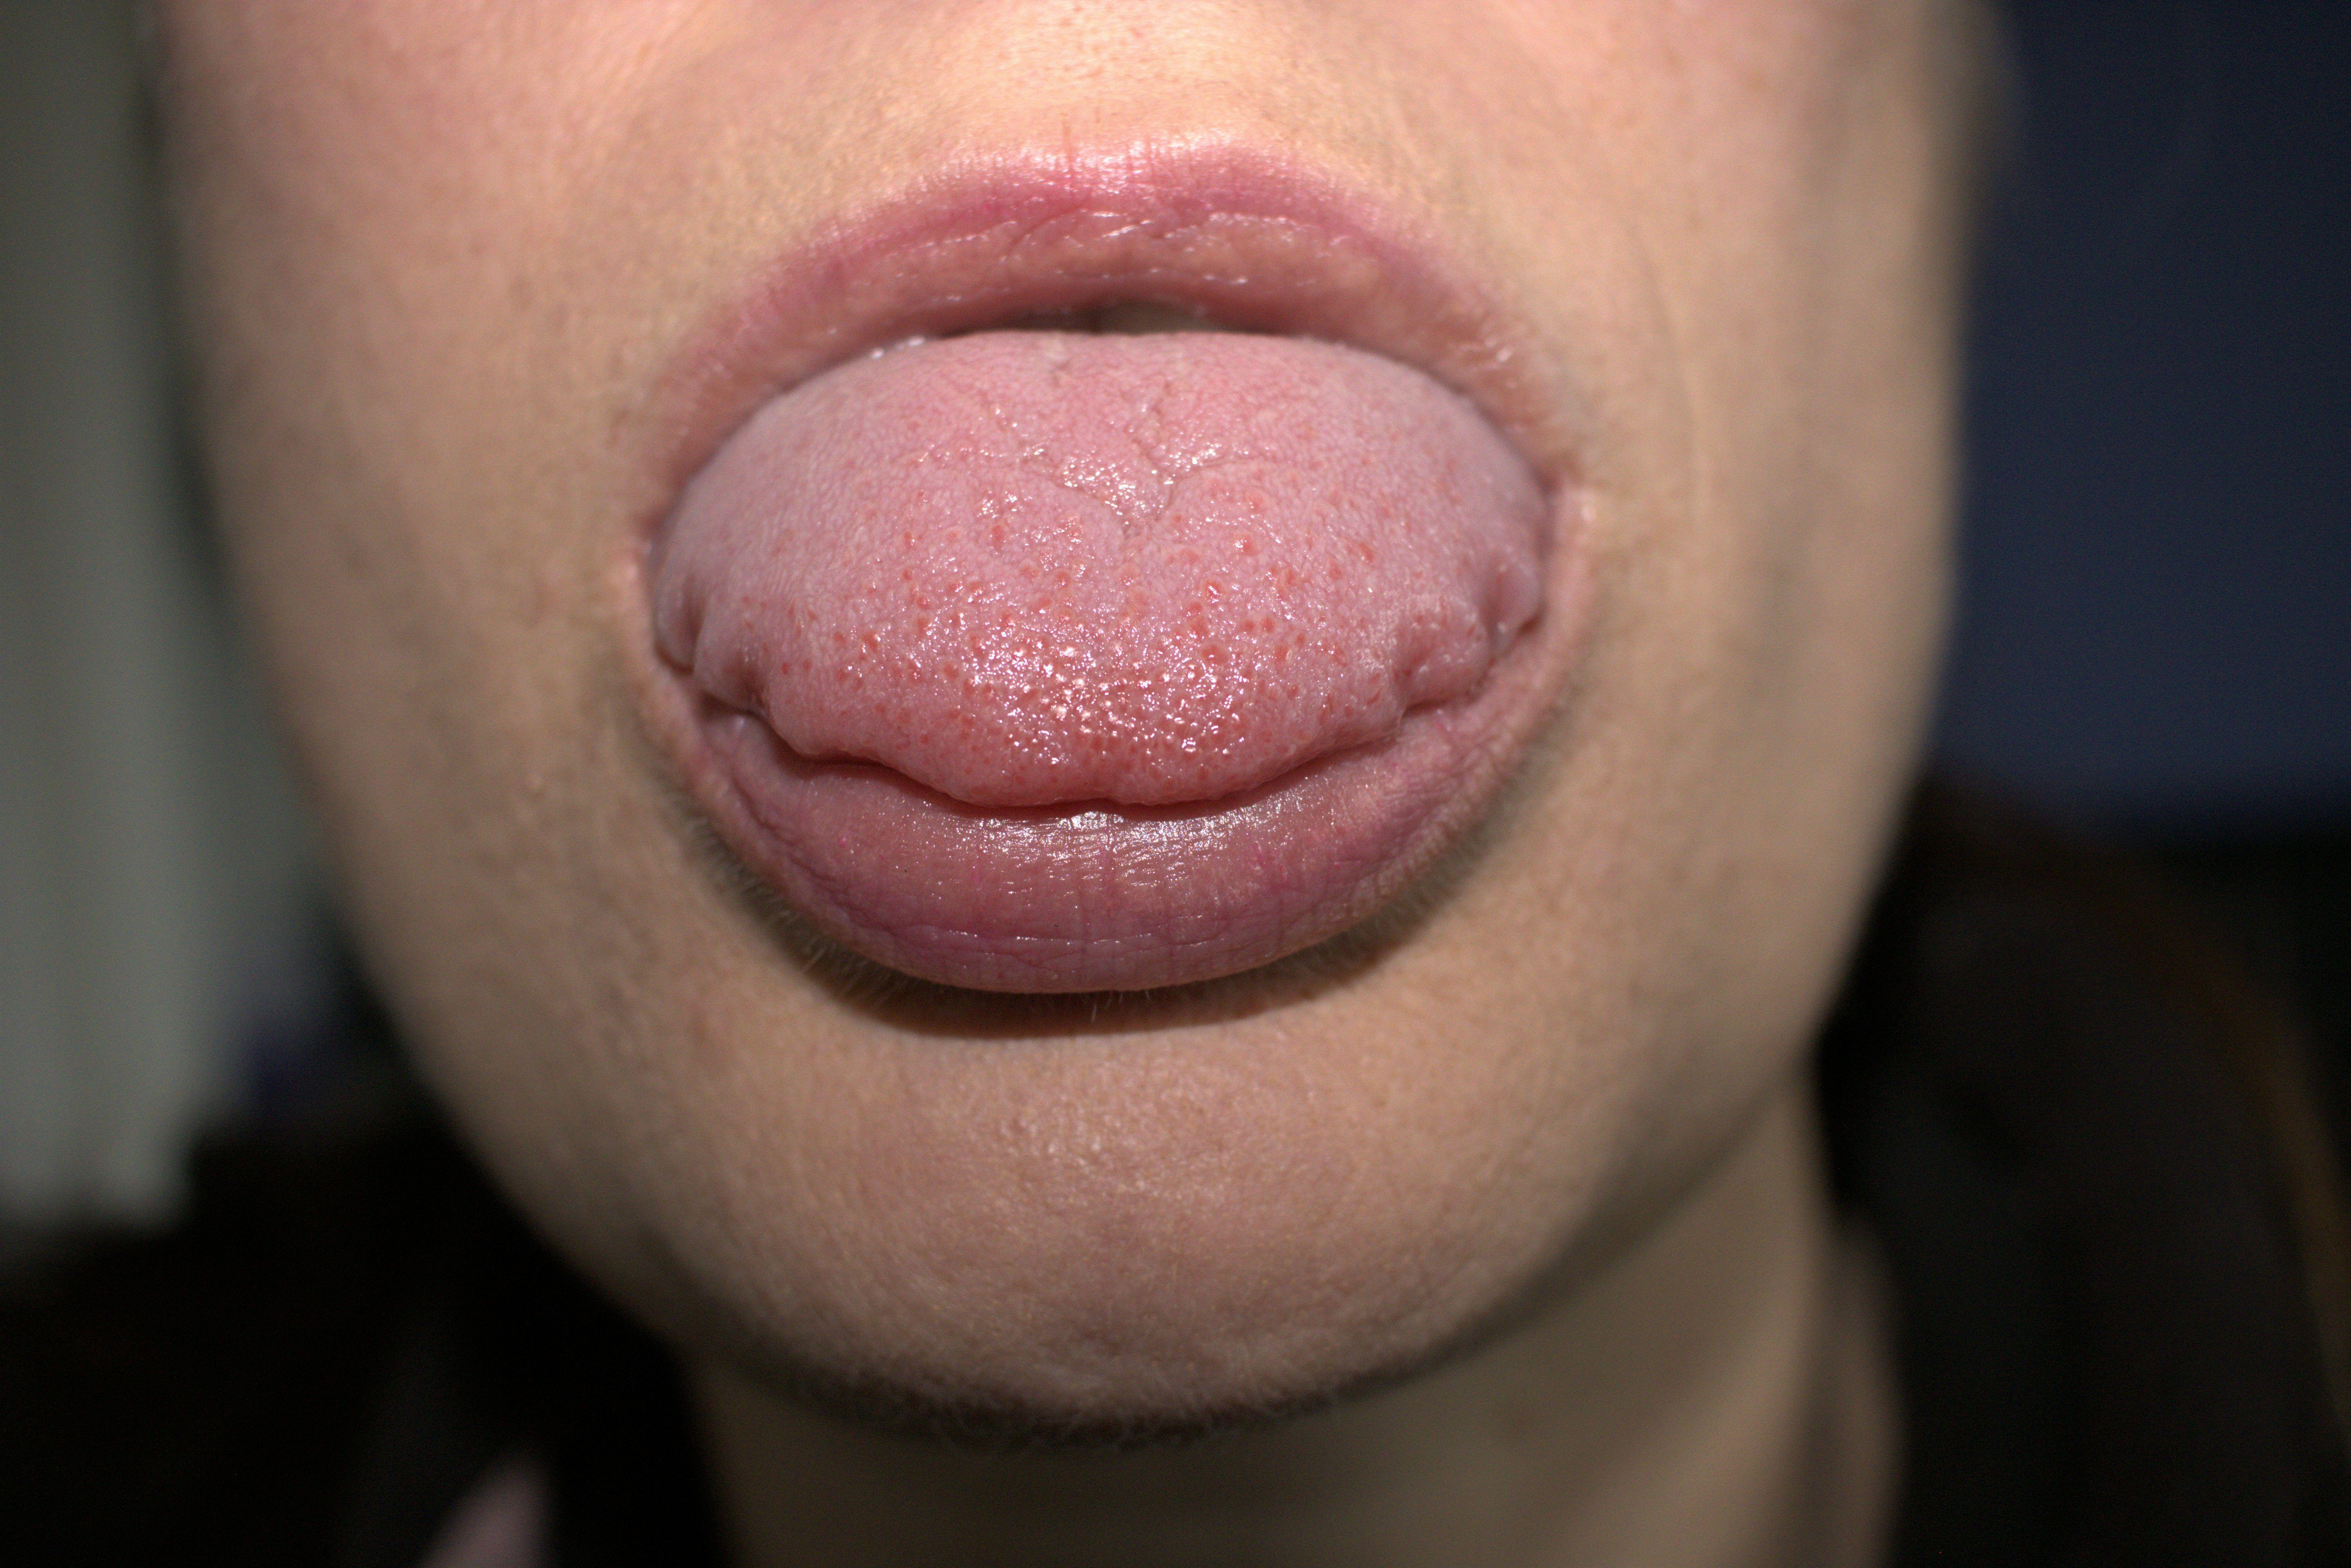 woman with Scalloped Tongue